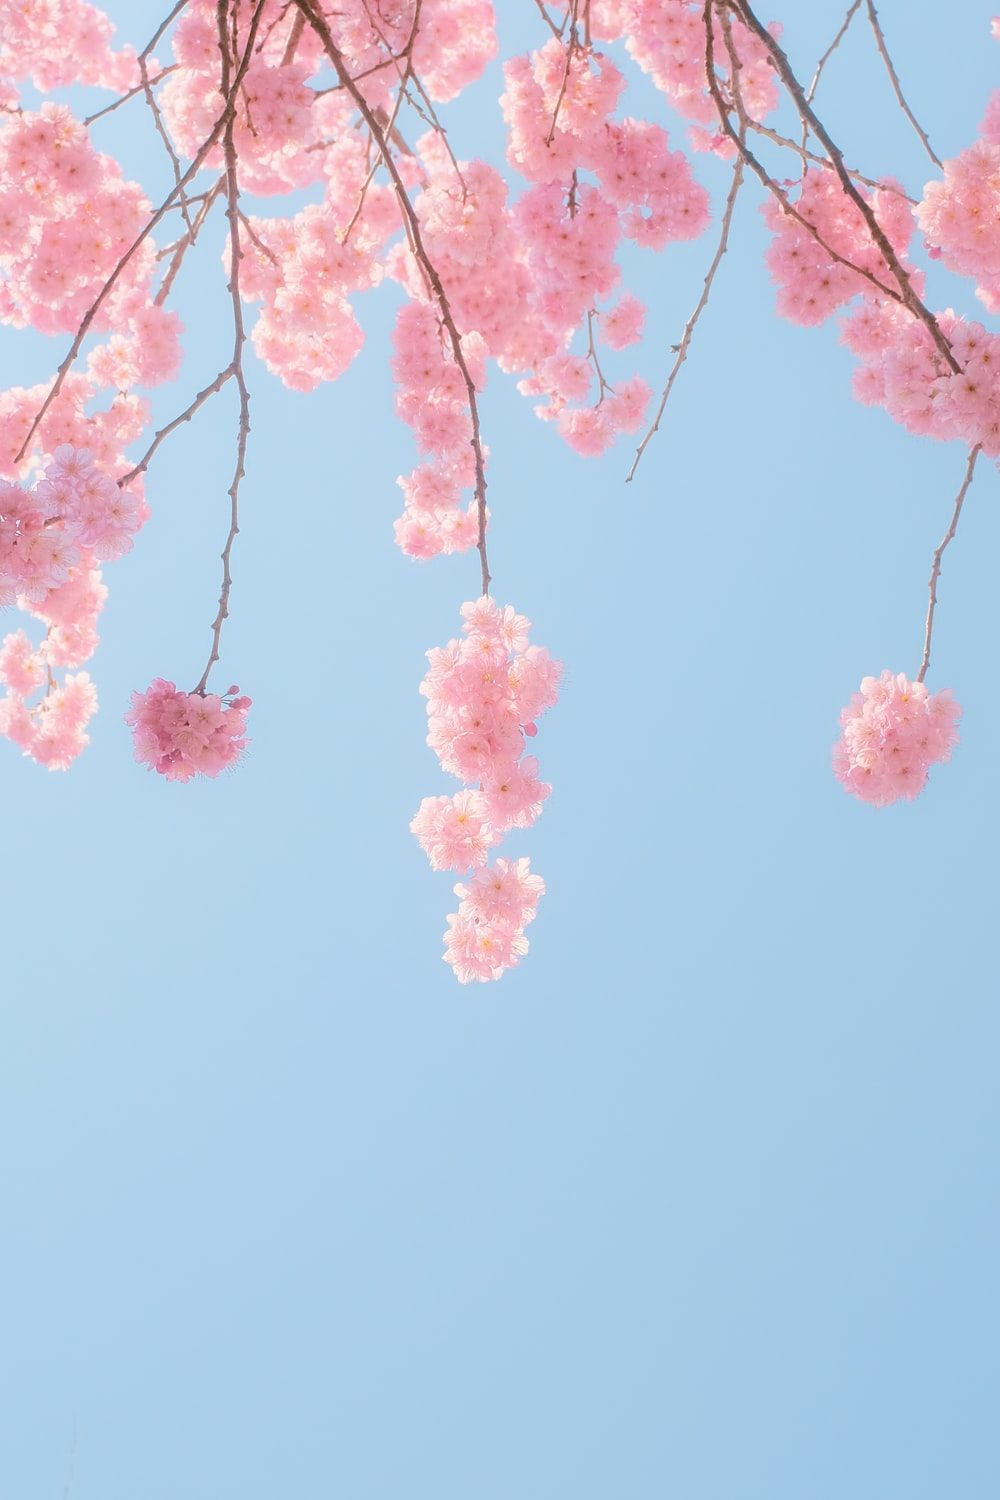 Cherry Blossom Picture. Download Free Image